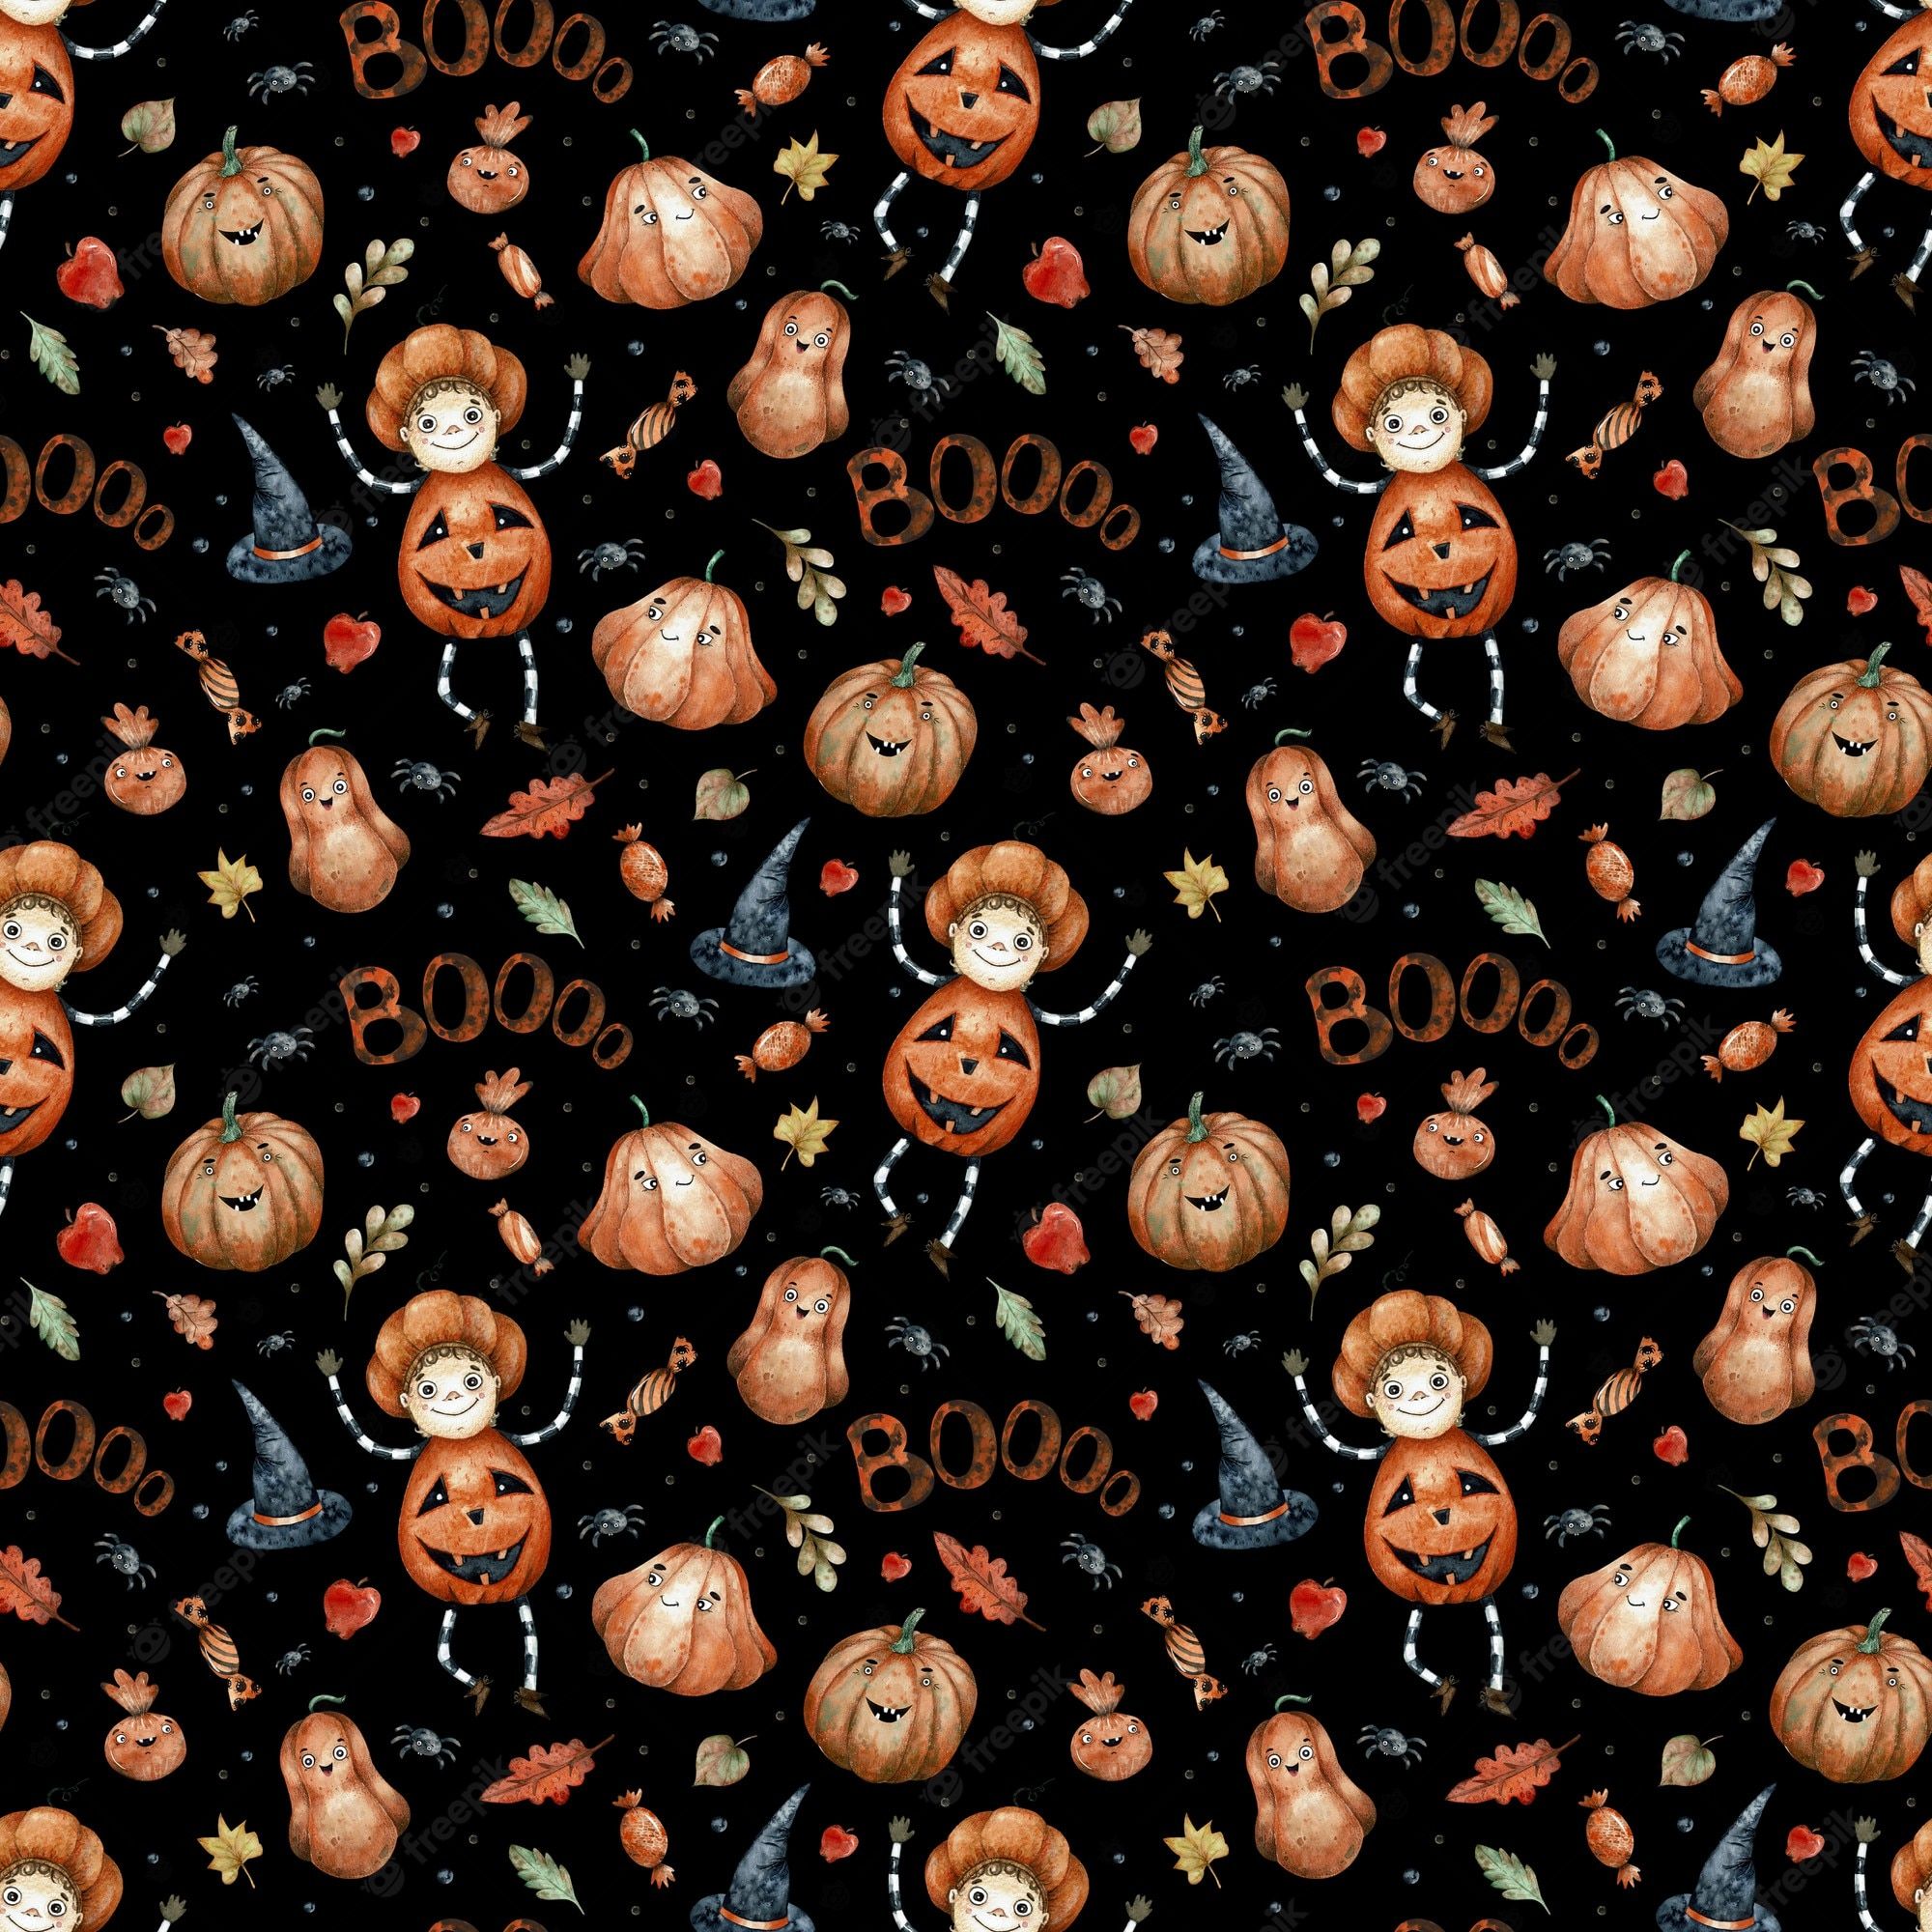 A pattern with pumpkins, ghosts and other halloween items - Dark orange